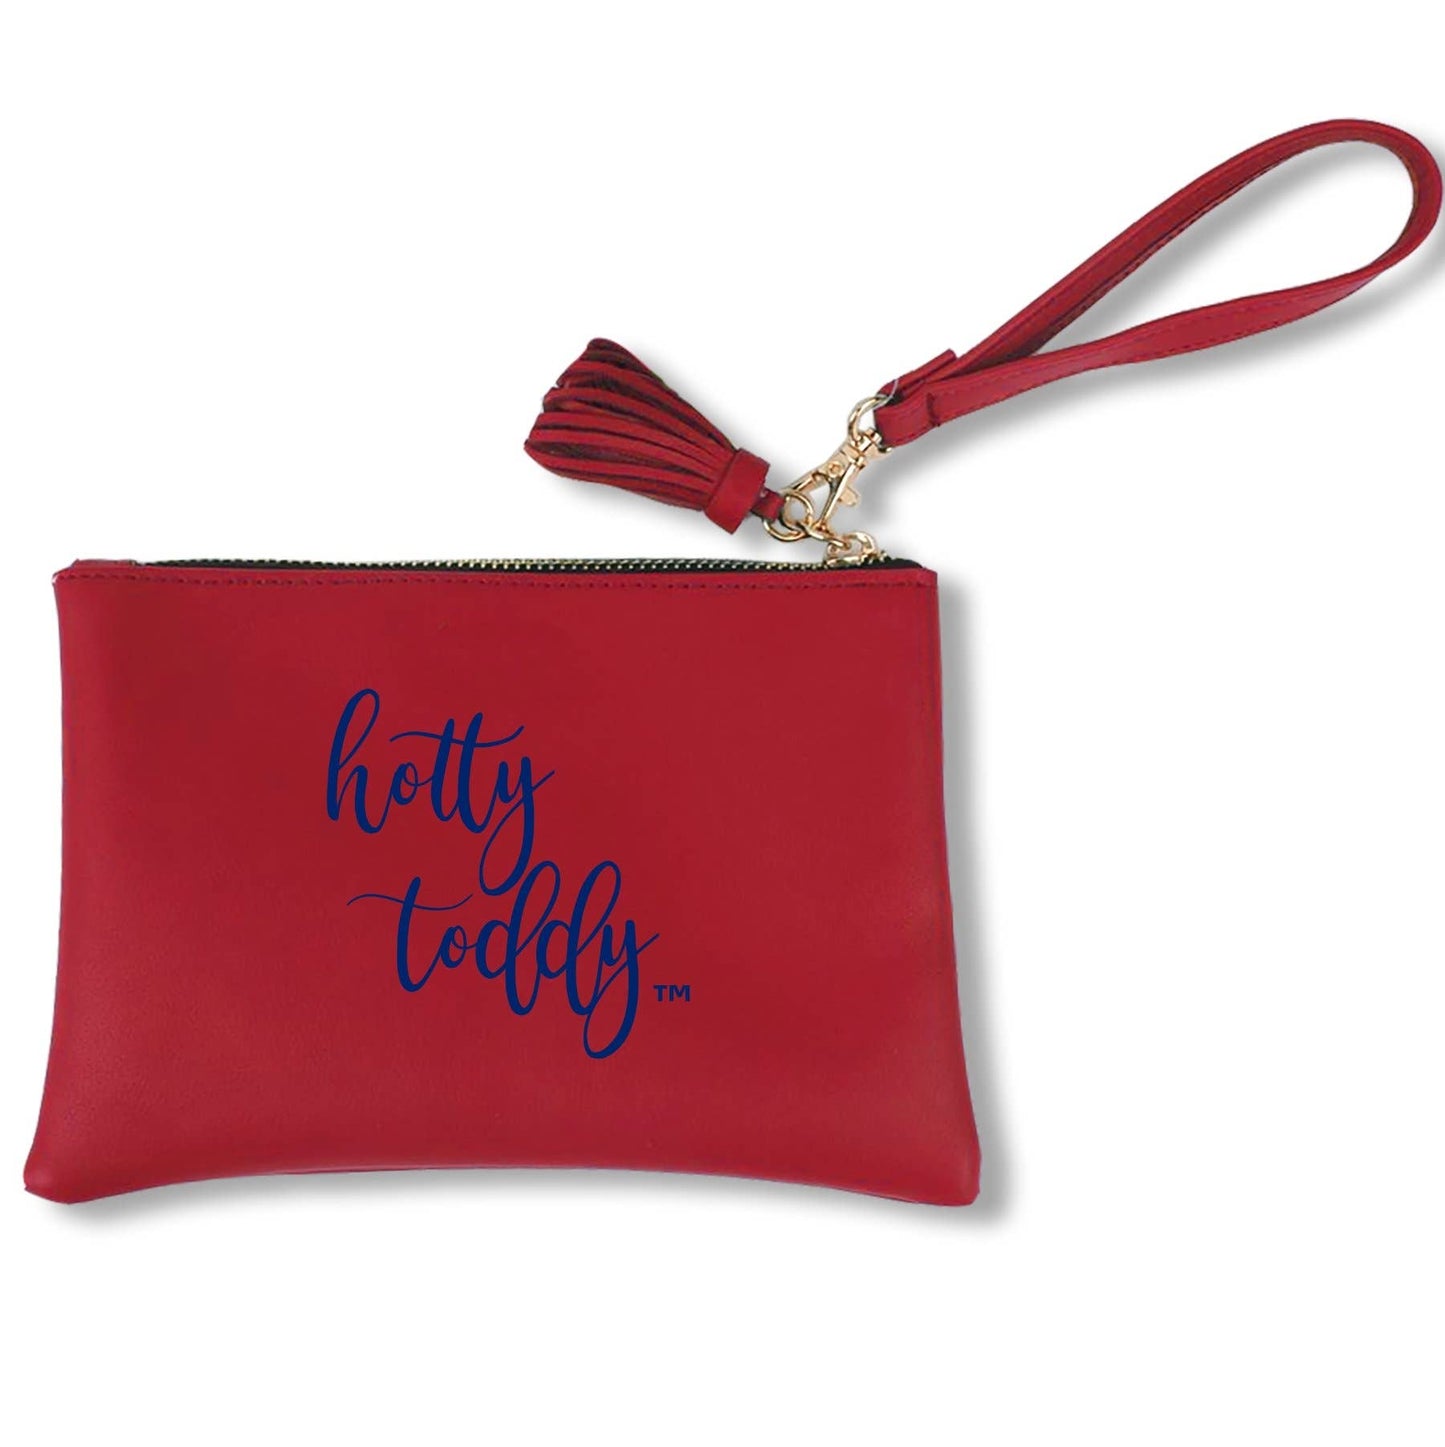 "Hotty Toddy" Wristlet